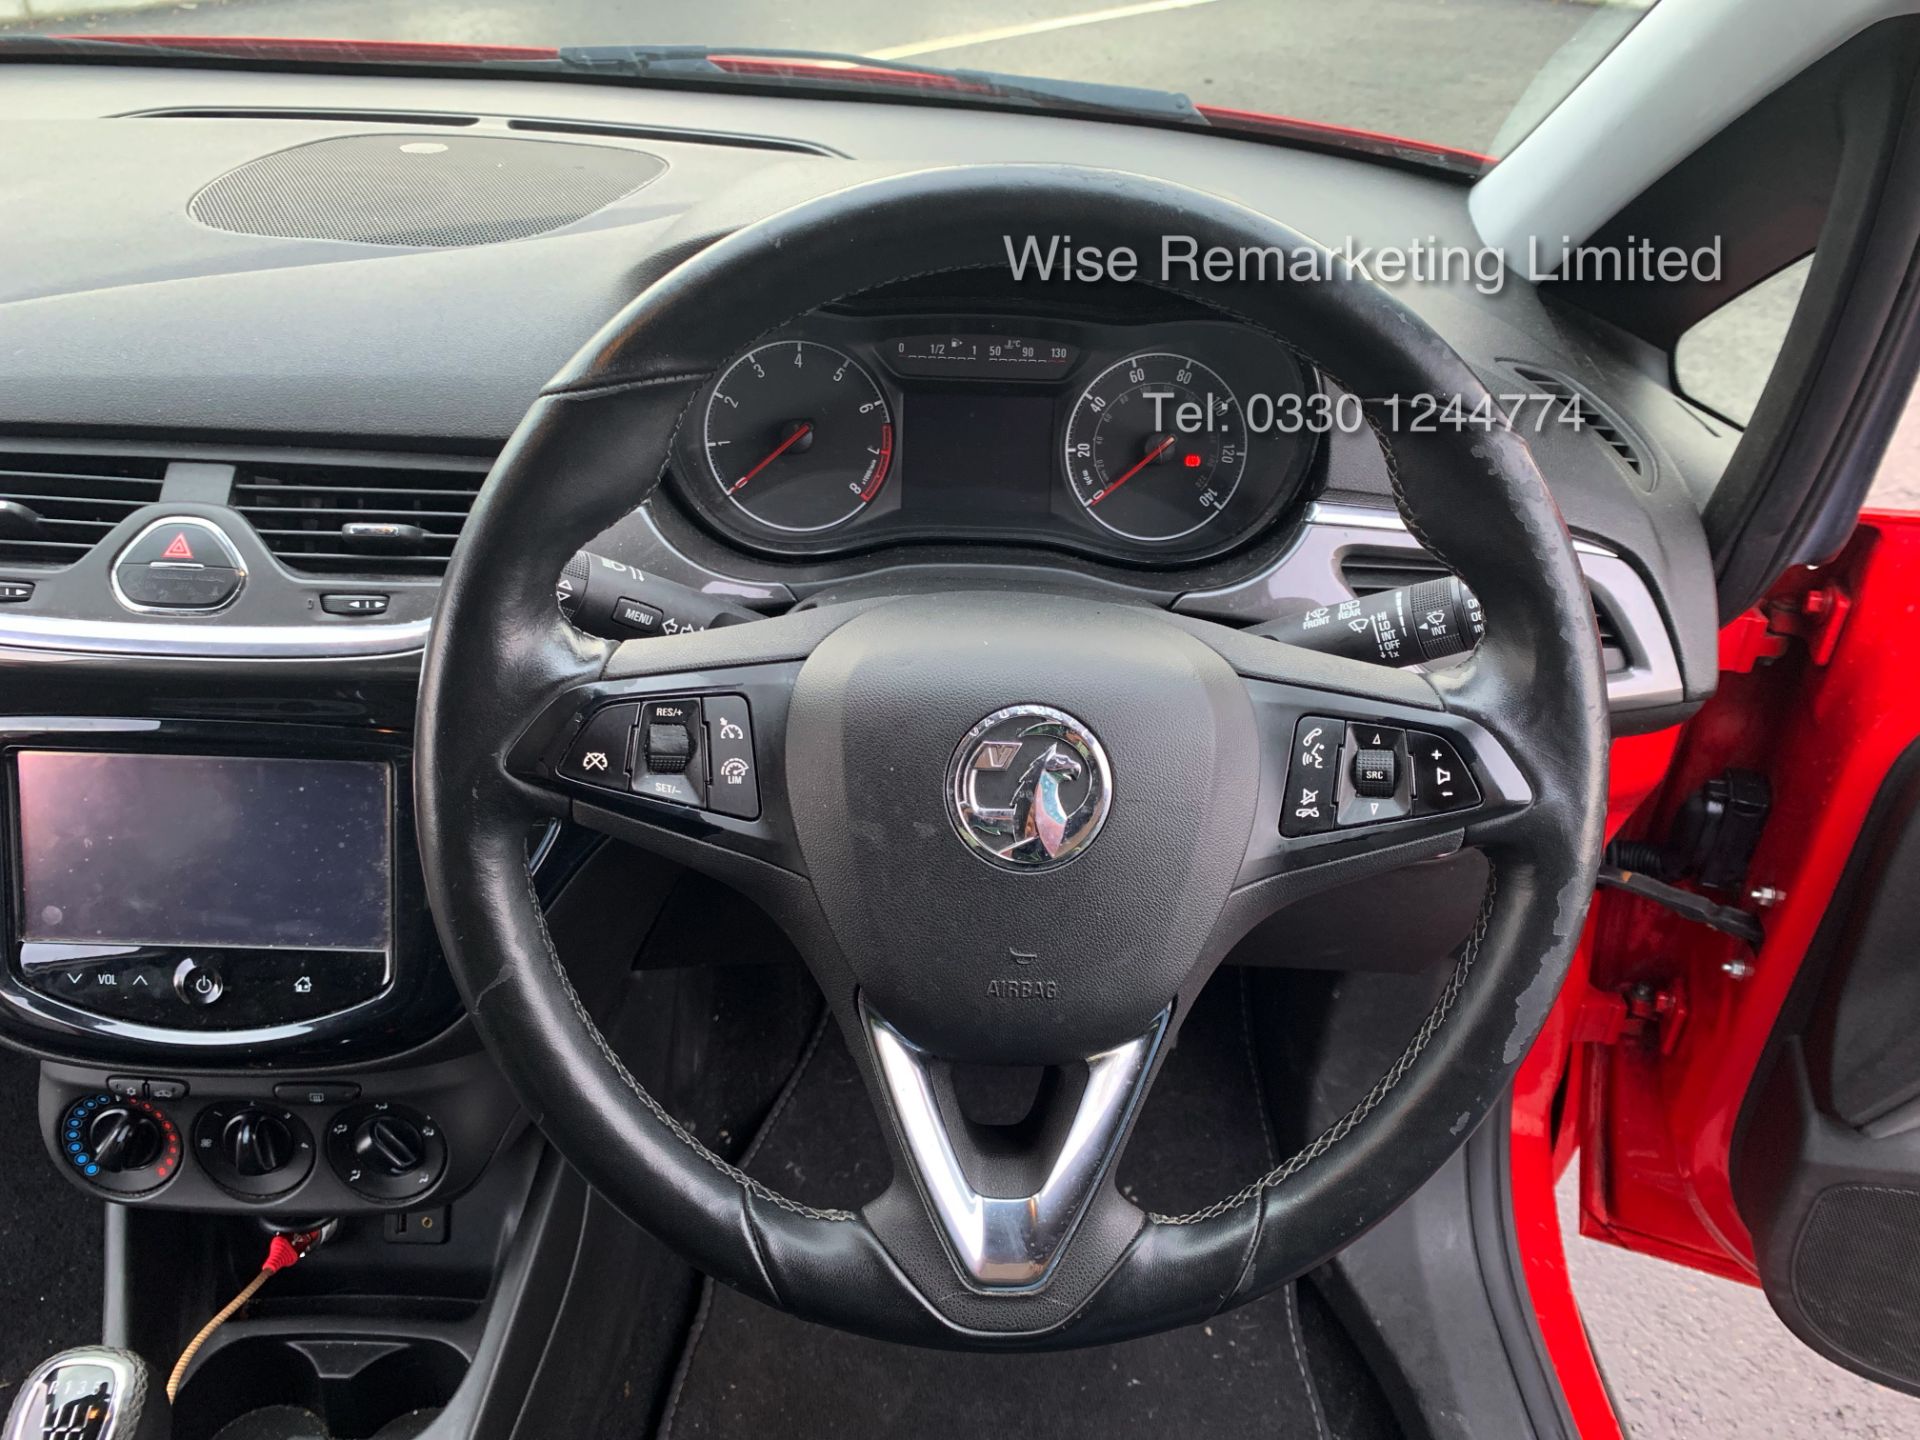 Vauxhall Corsa 1.4 Turbo Excite AC Ecoflex - 2015 15 Reg - Heated Seats - Touch Screen **TOP SPEC** - Image 19 of 22